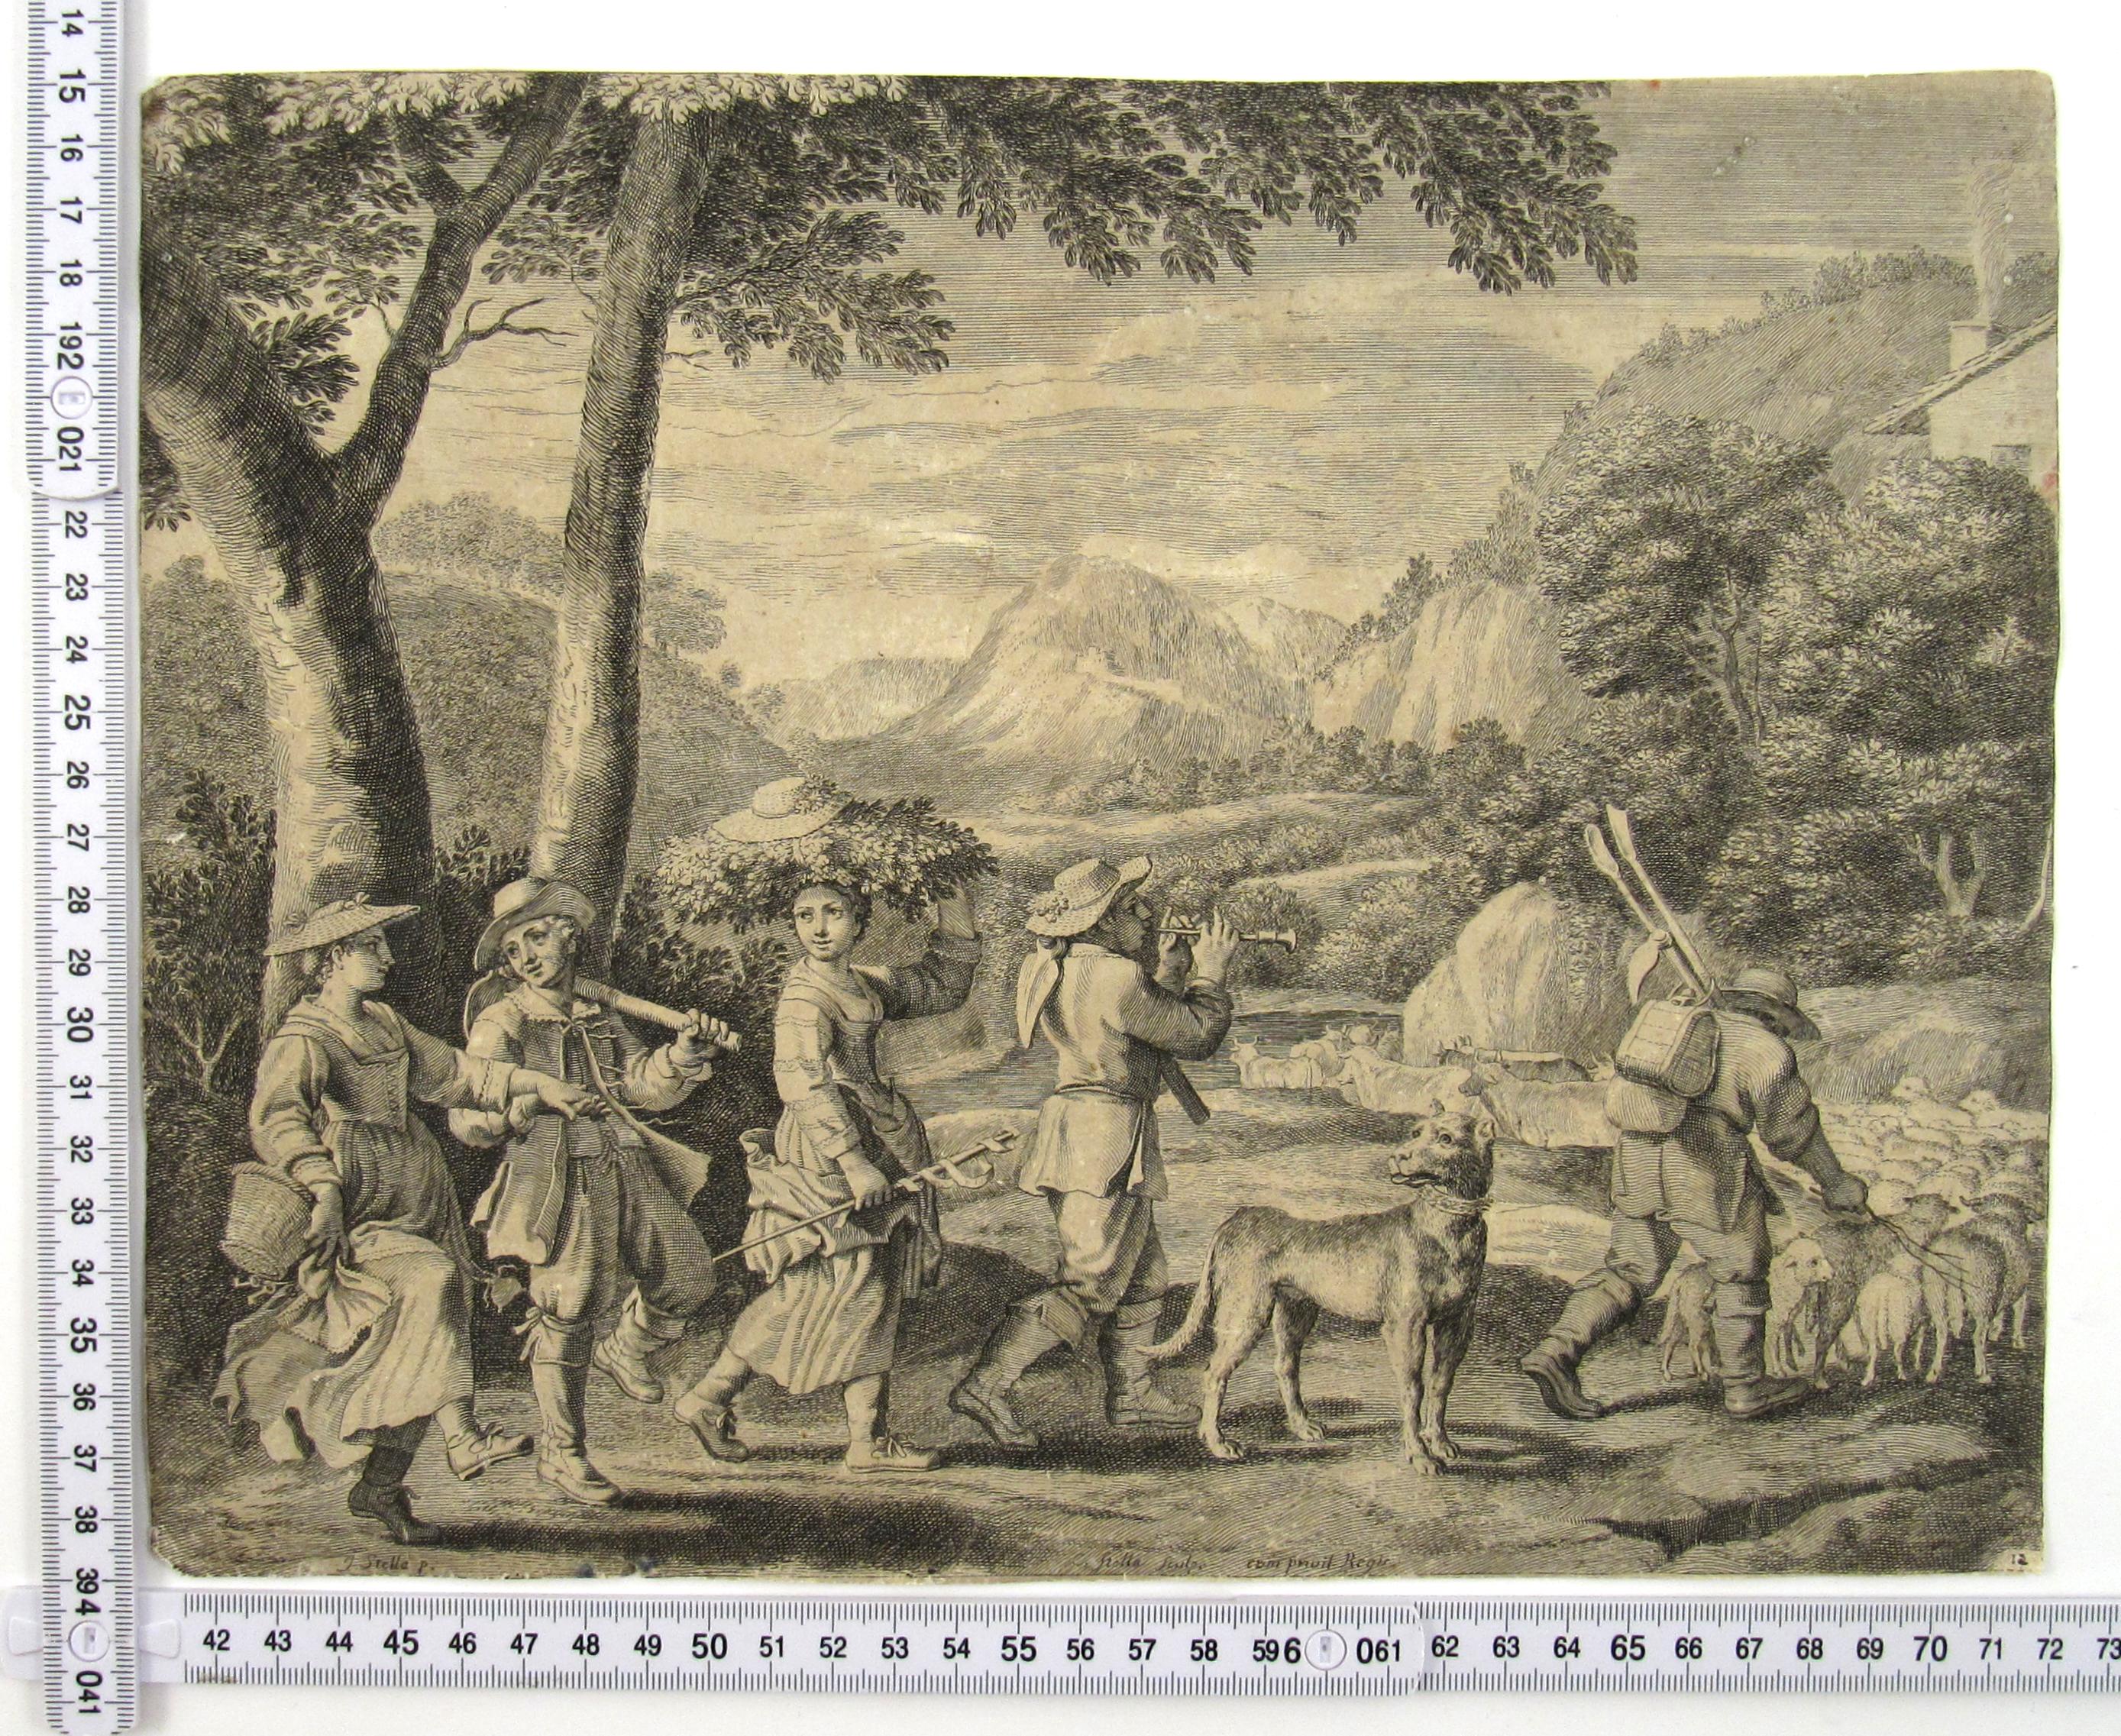 Music making Peasants returning Home - 17thC Etching from Les Pastorales - Brown Figurative Print by Claudine Bouzonnet-Stella